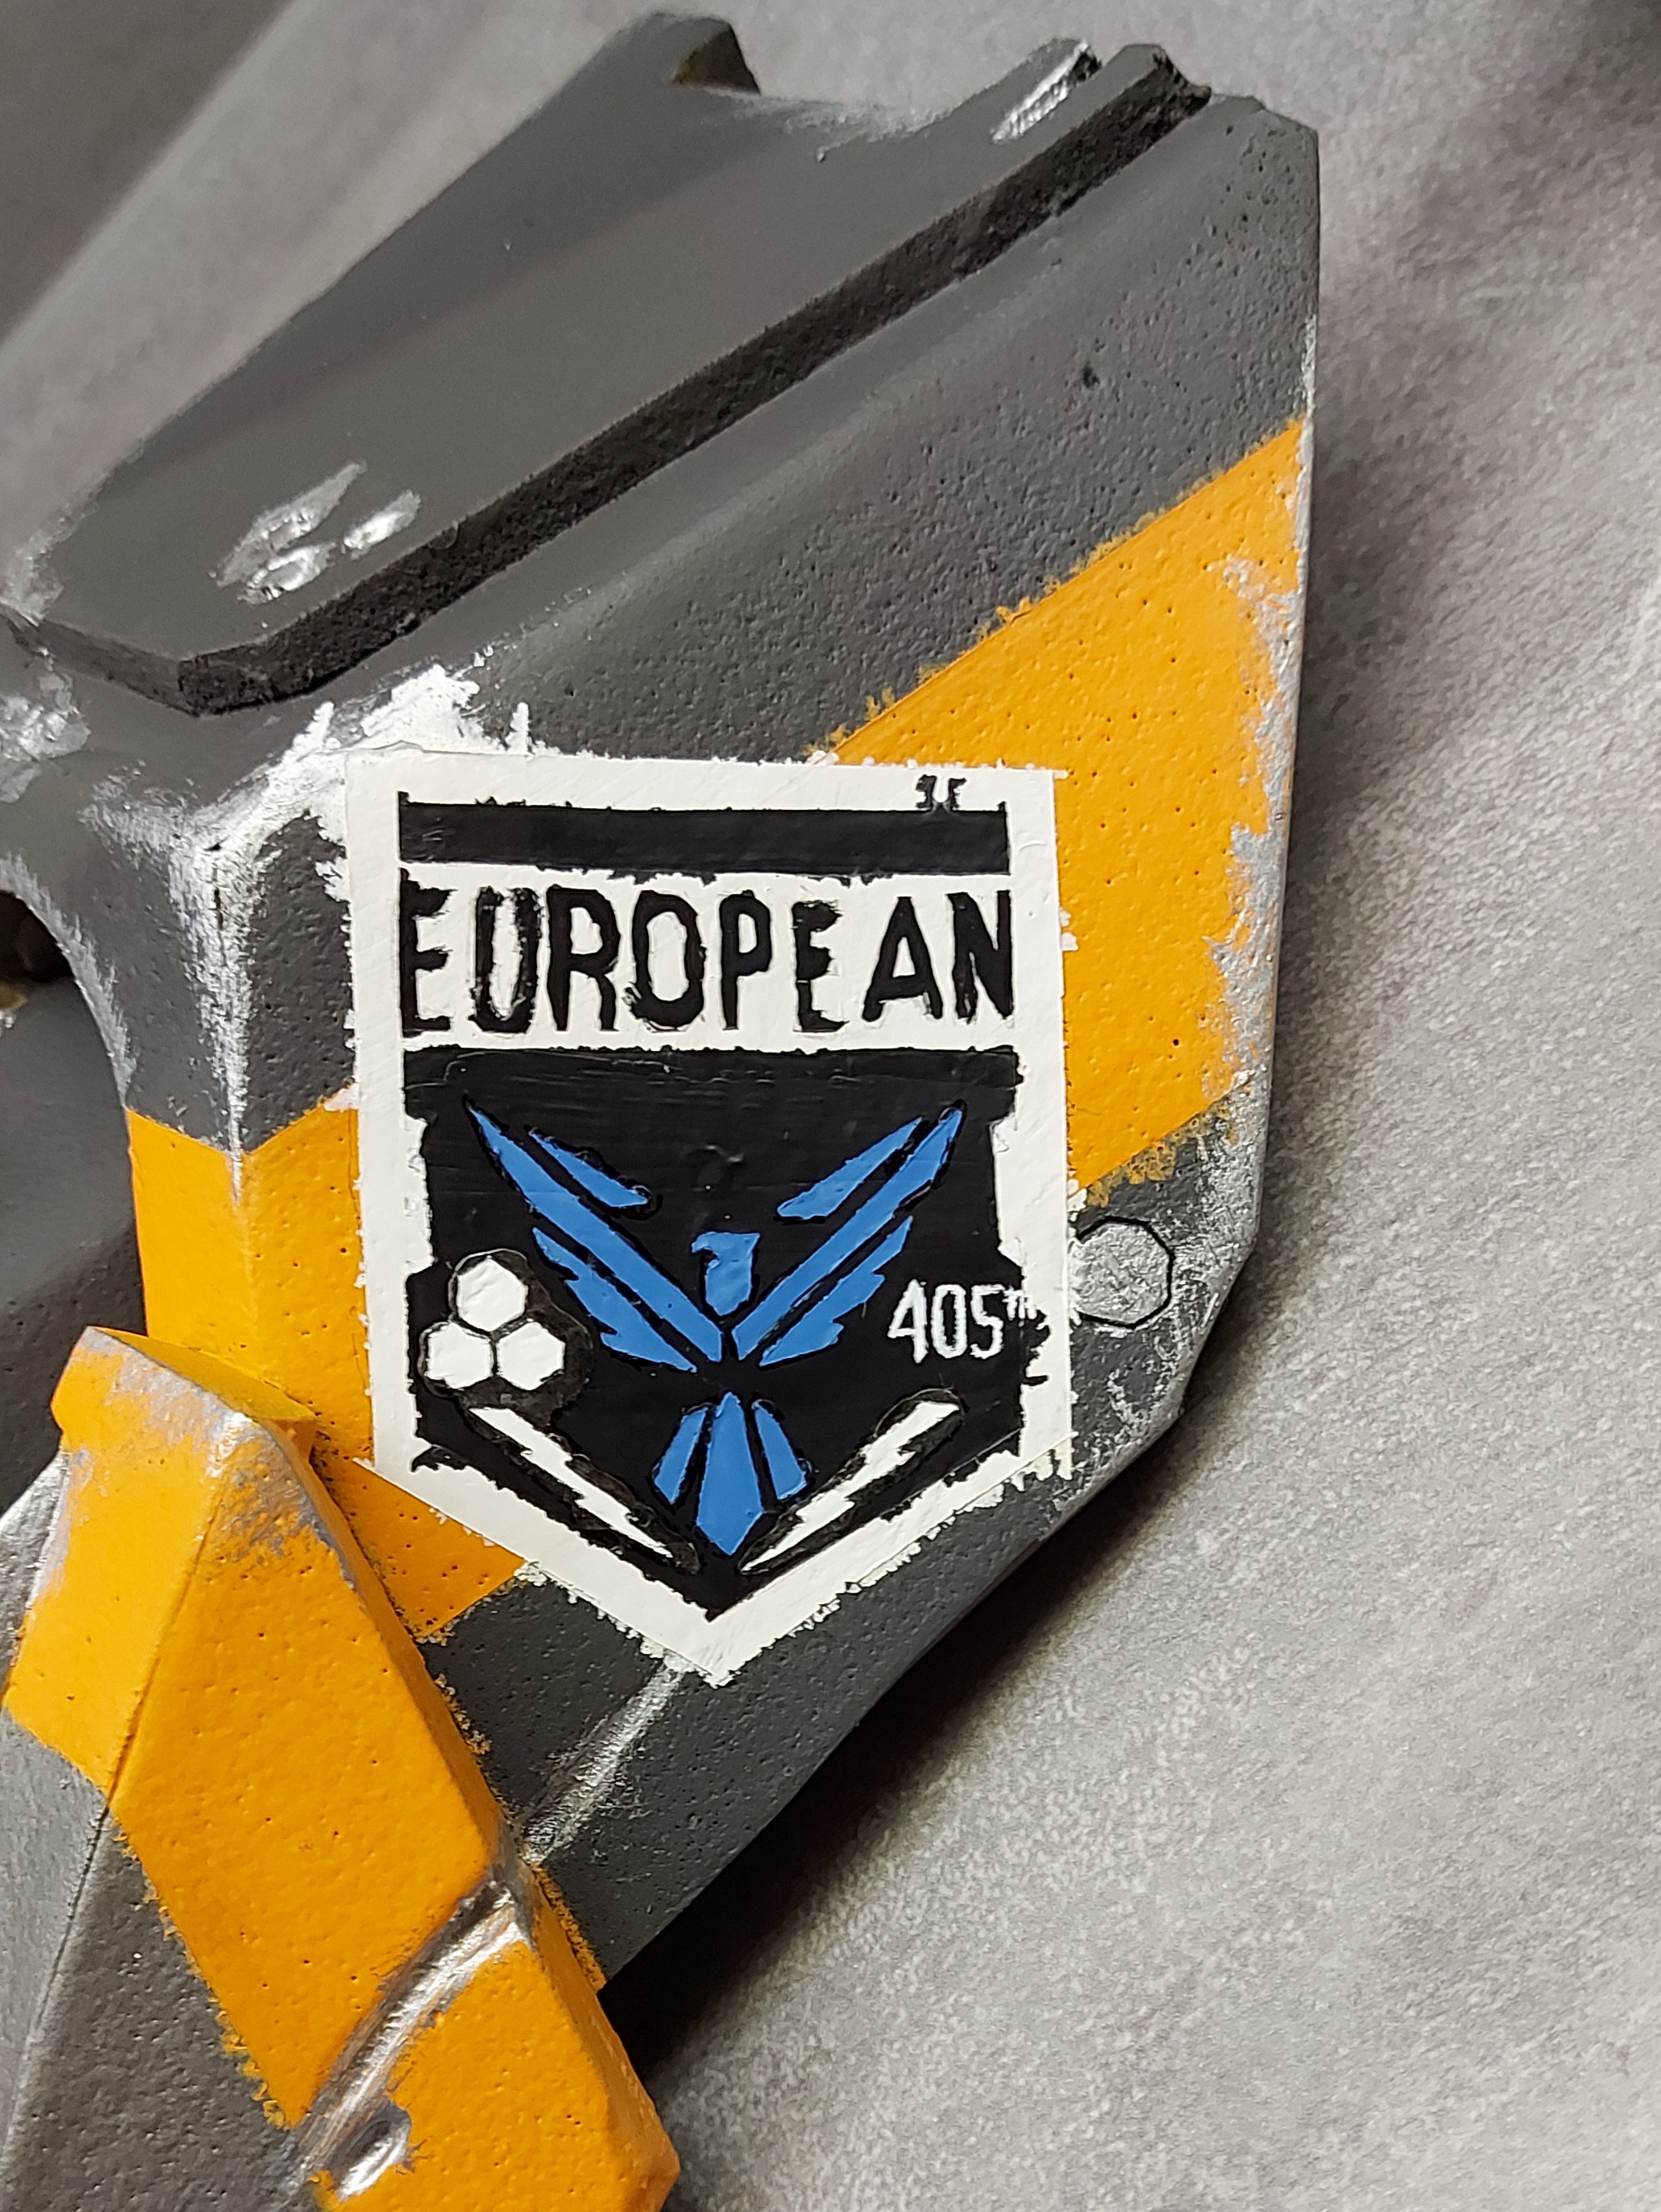 Shoulder pad with the 405th European logo